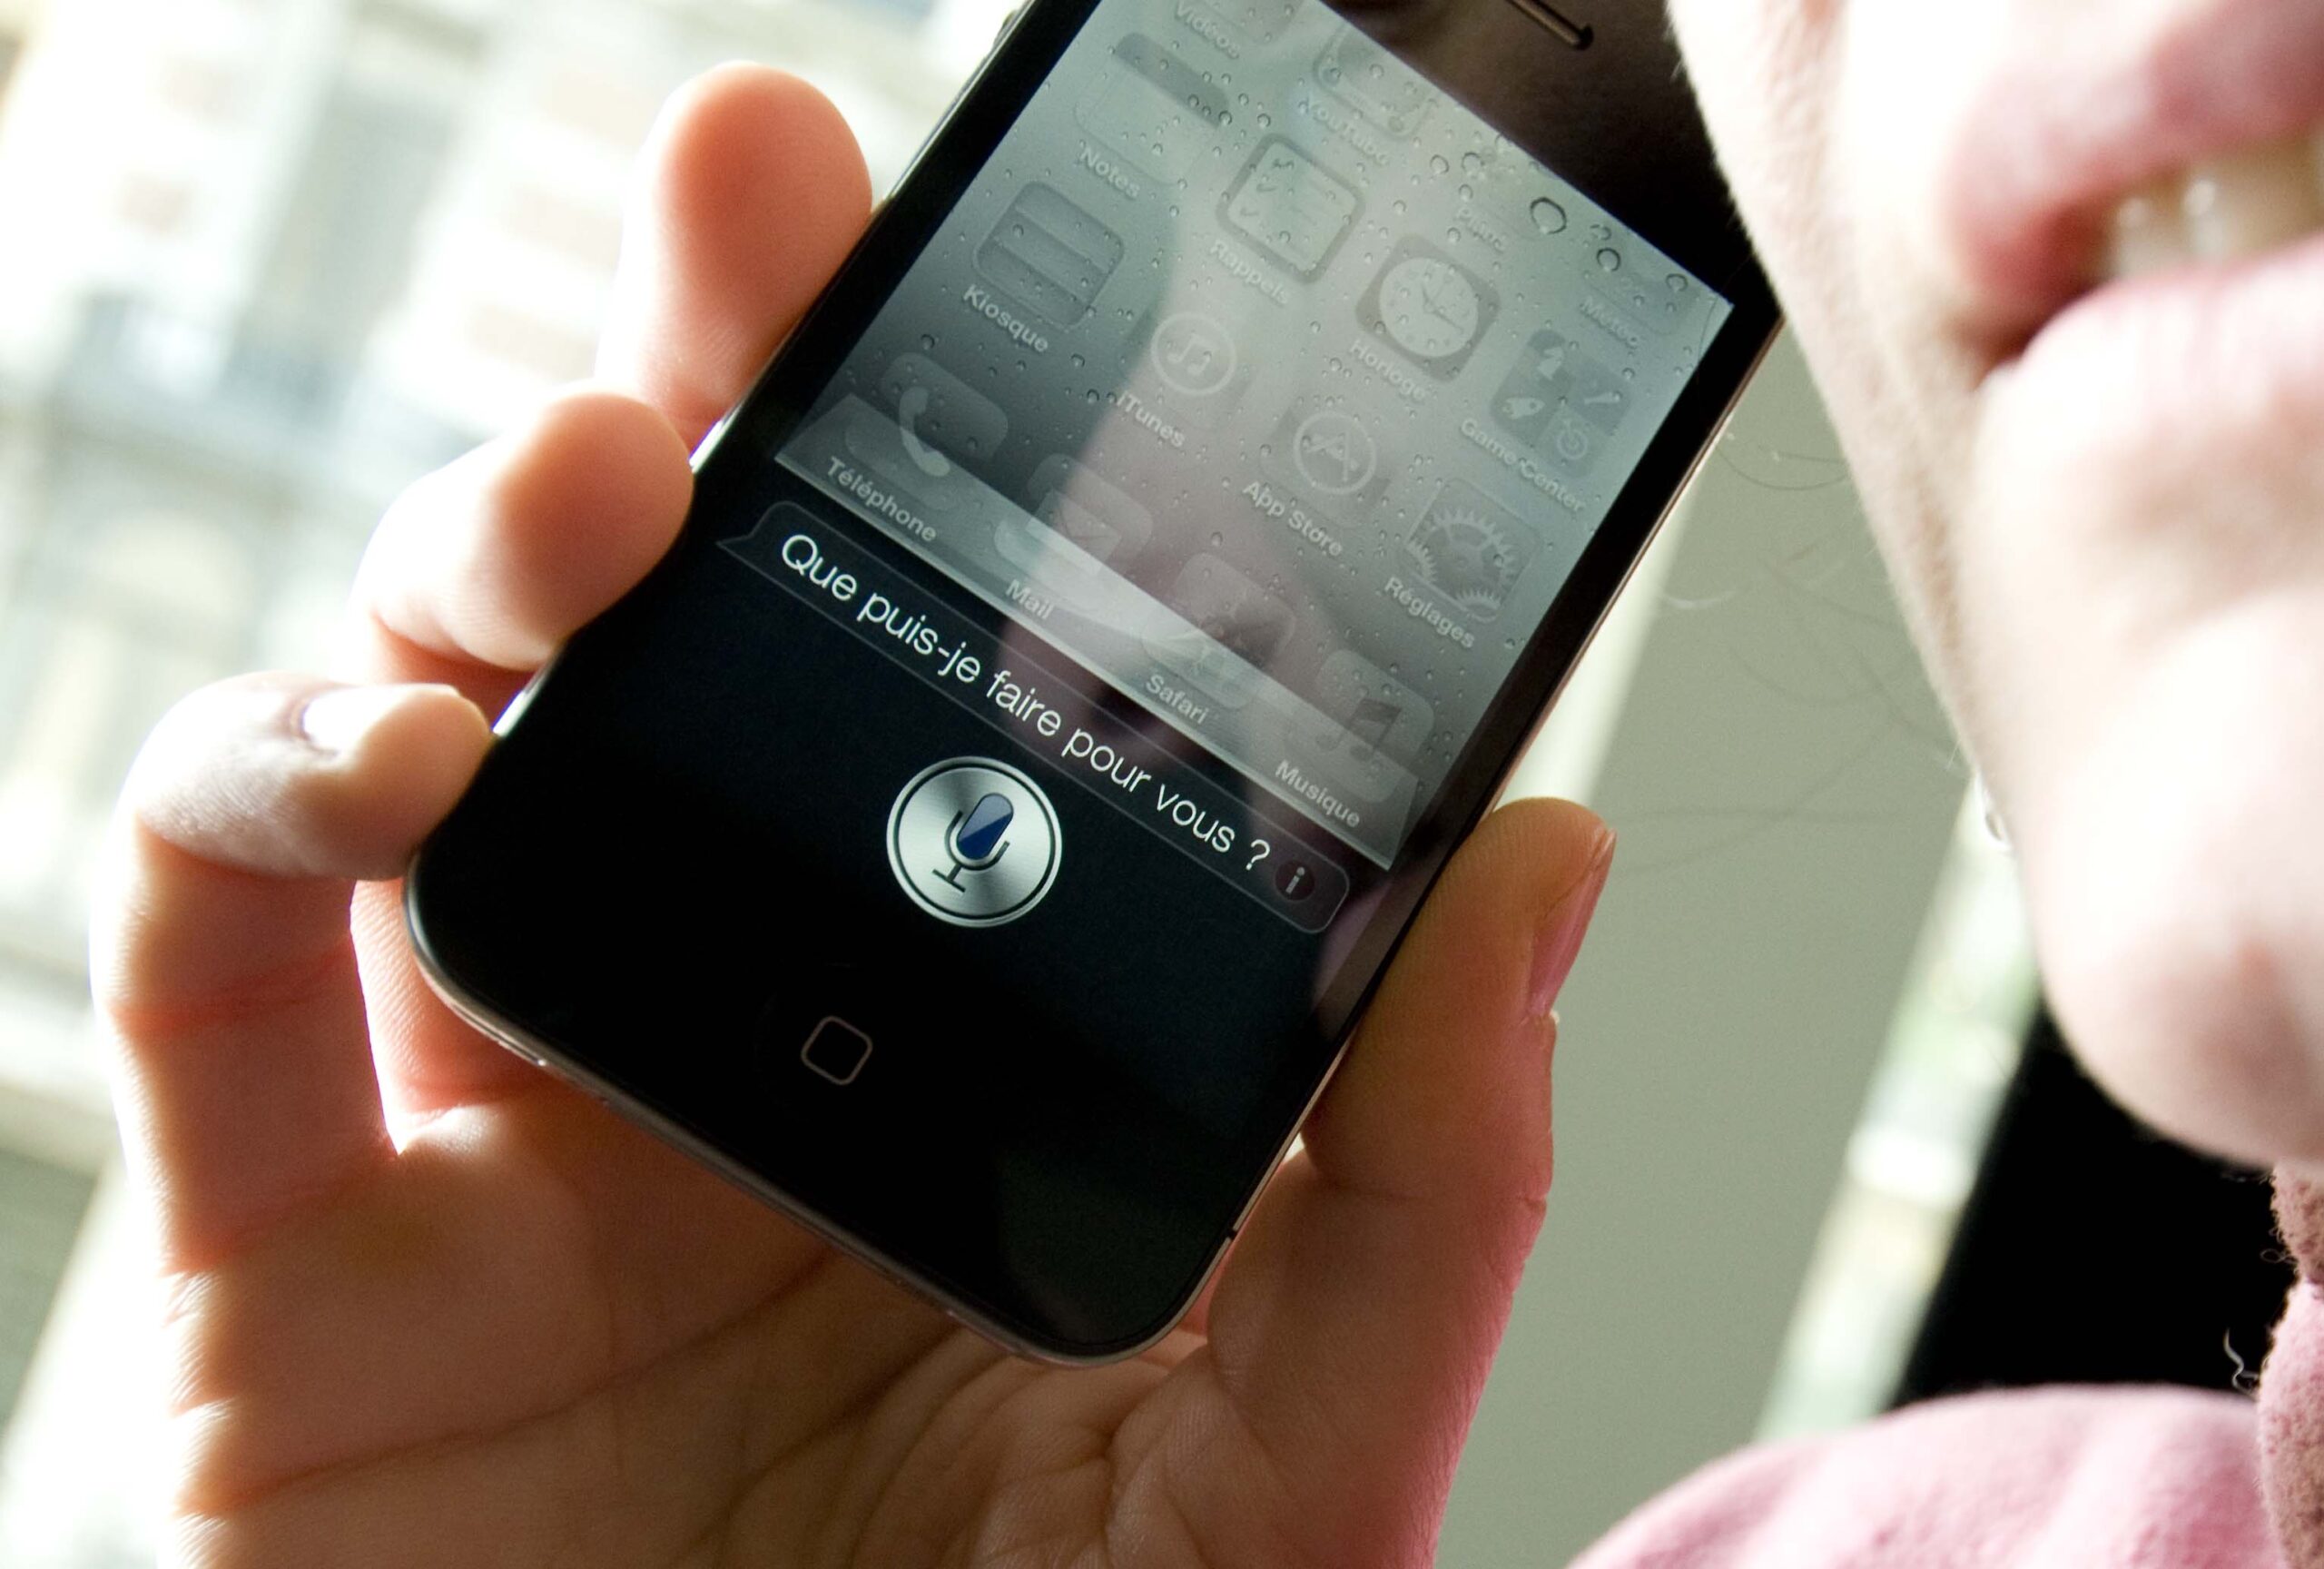 Siri forces users to switch to iOS 6